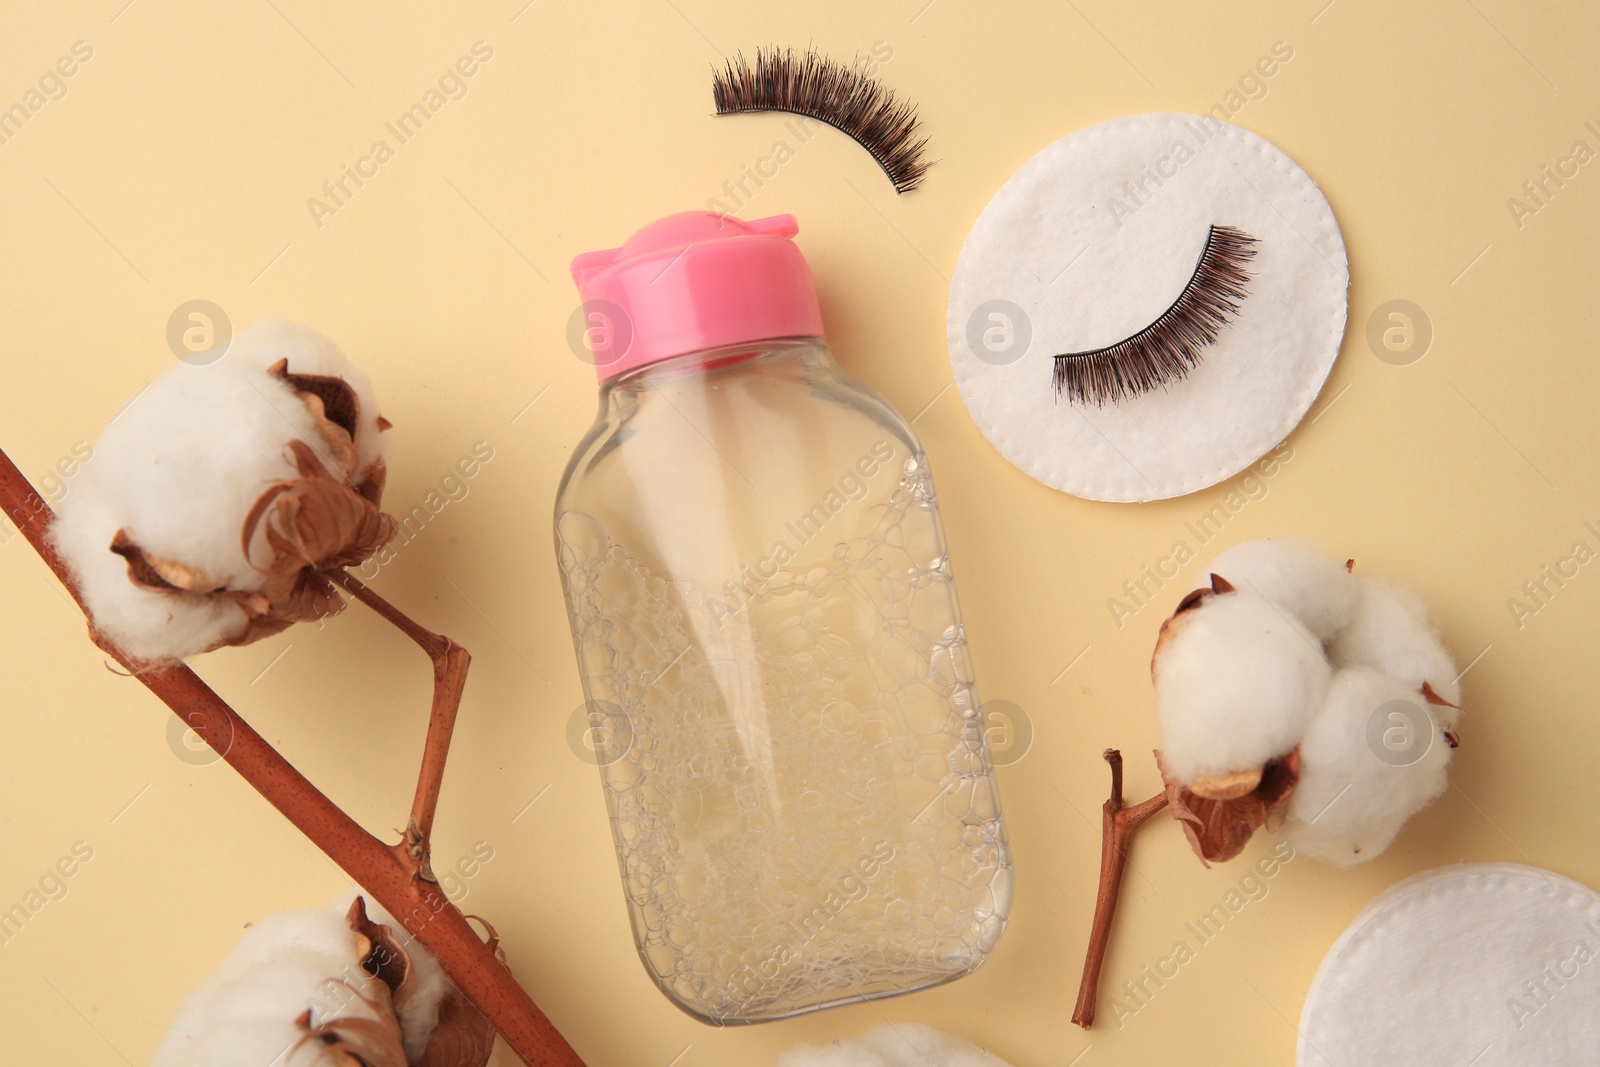 Photo of Bottle of makeup remover, cotton flowers, pads and false eyelashes on yellow background, flat lay